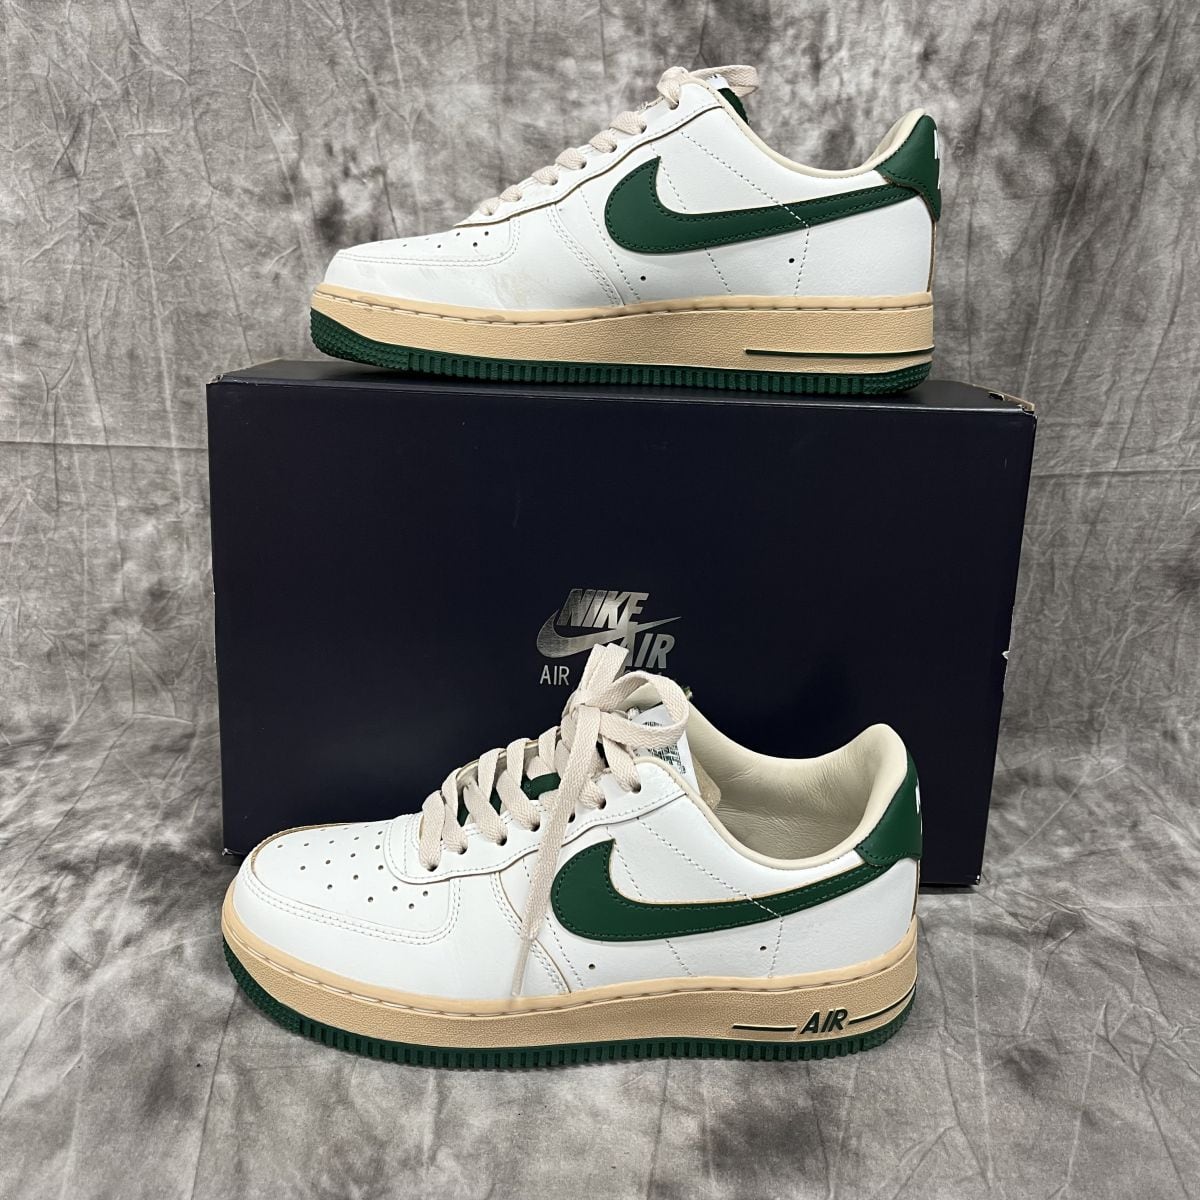 NIKE/ナイキ WMNS AIR FORCE 1 LOW '07 LV8 Green and Muslin/エアフォース1 ロー  グリーンアンドモスリン DZ4764-133/25.0